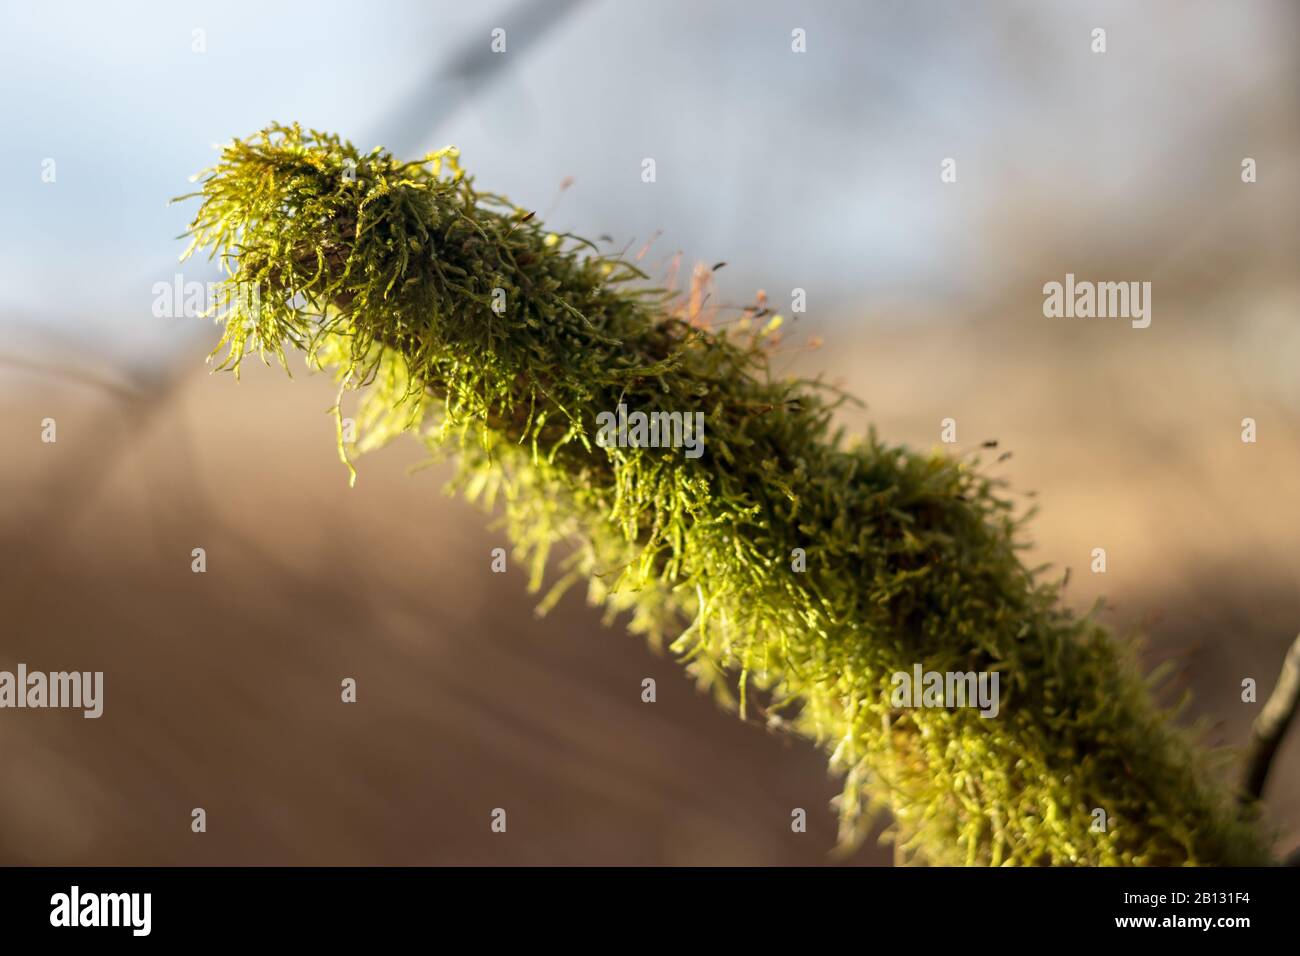 branch covered with green moss on a sunny day, close up view, blurred background Stock Photo